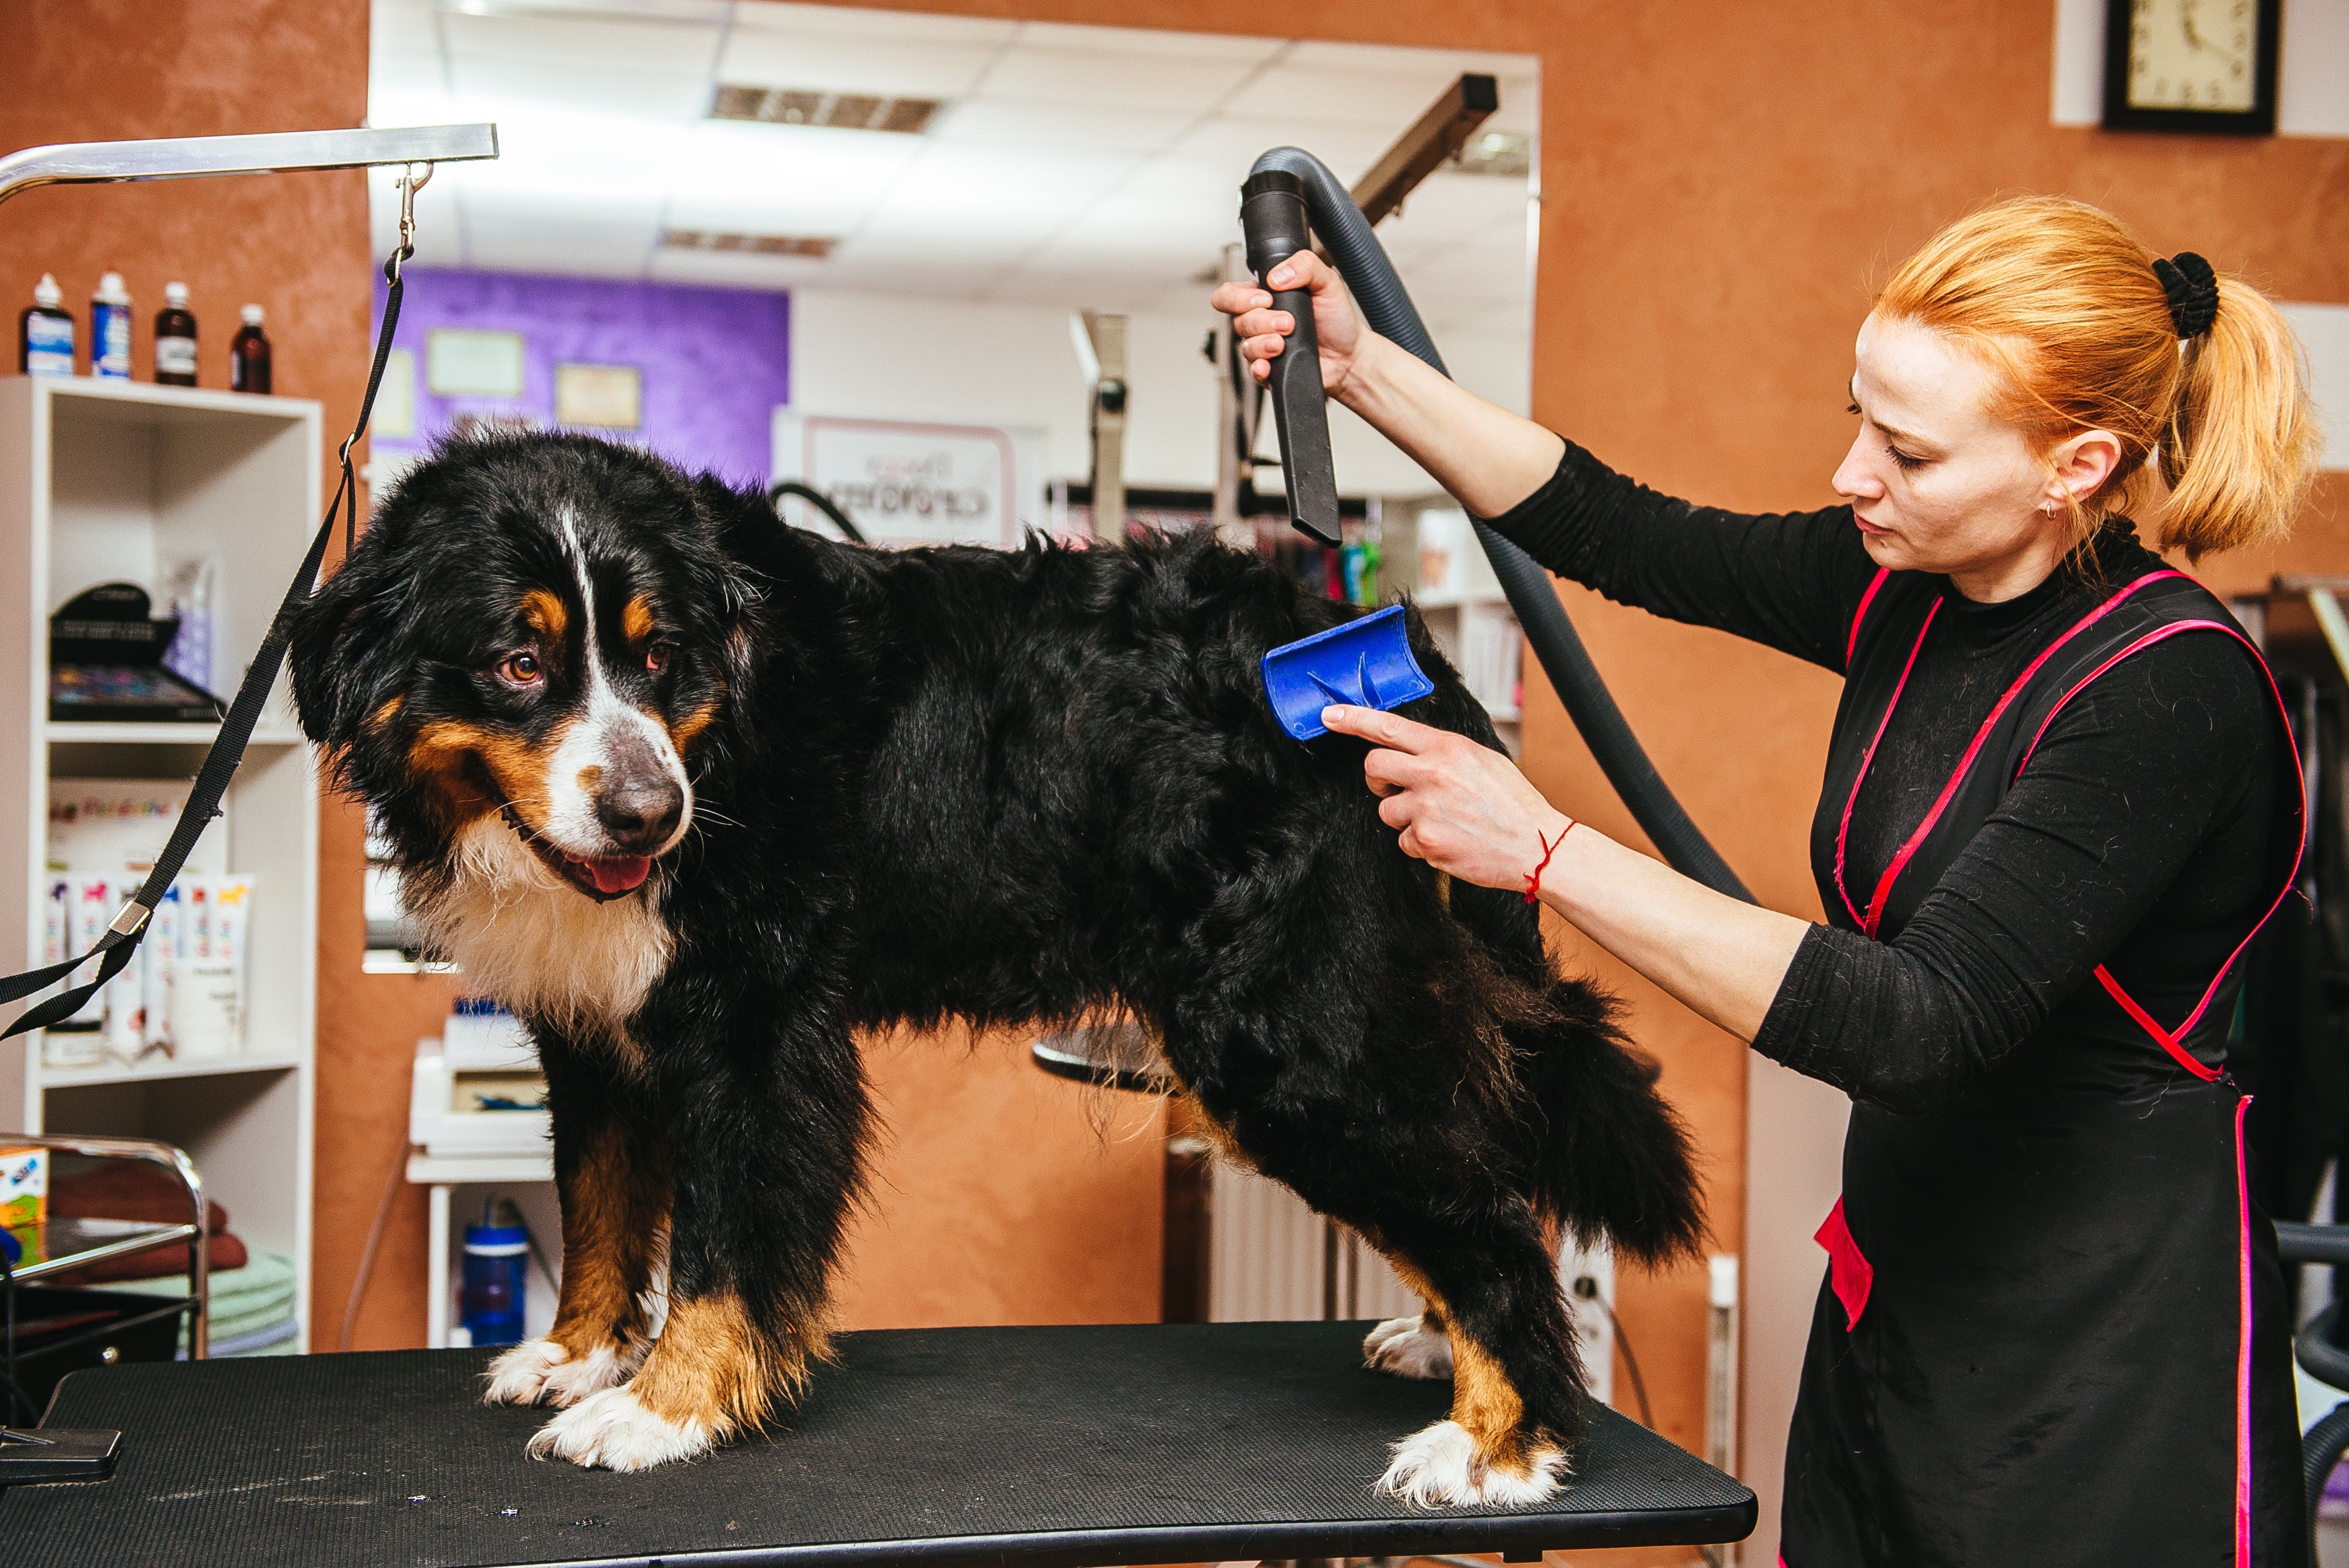 Useful Tips on How to Dry a Dog after a Bath and Blowing Out Undercoats - My Pet Command